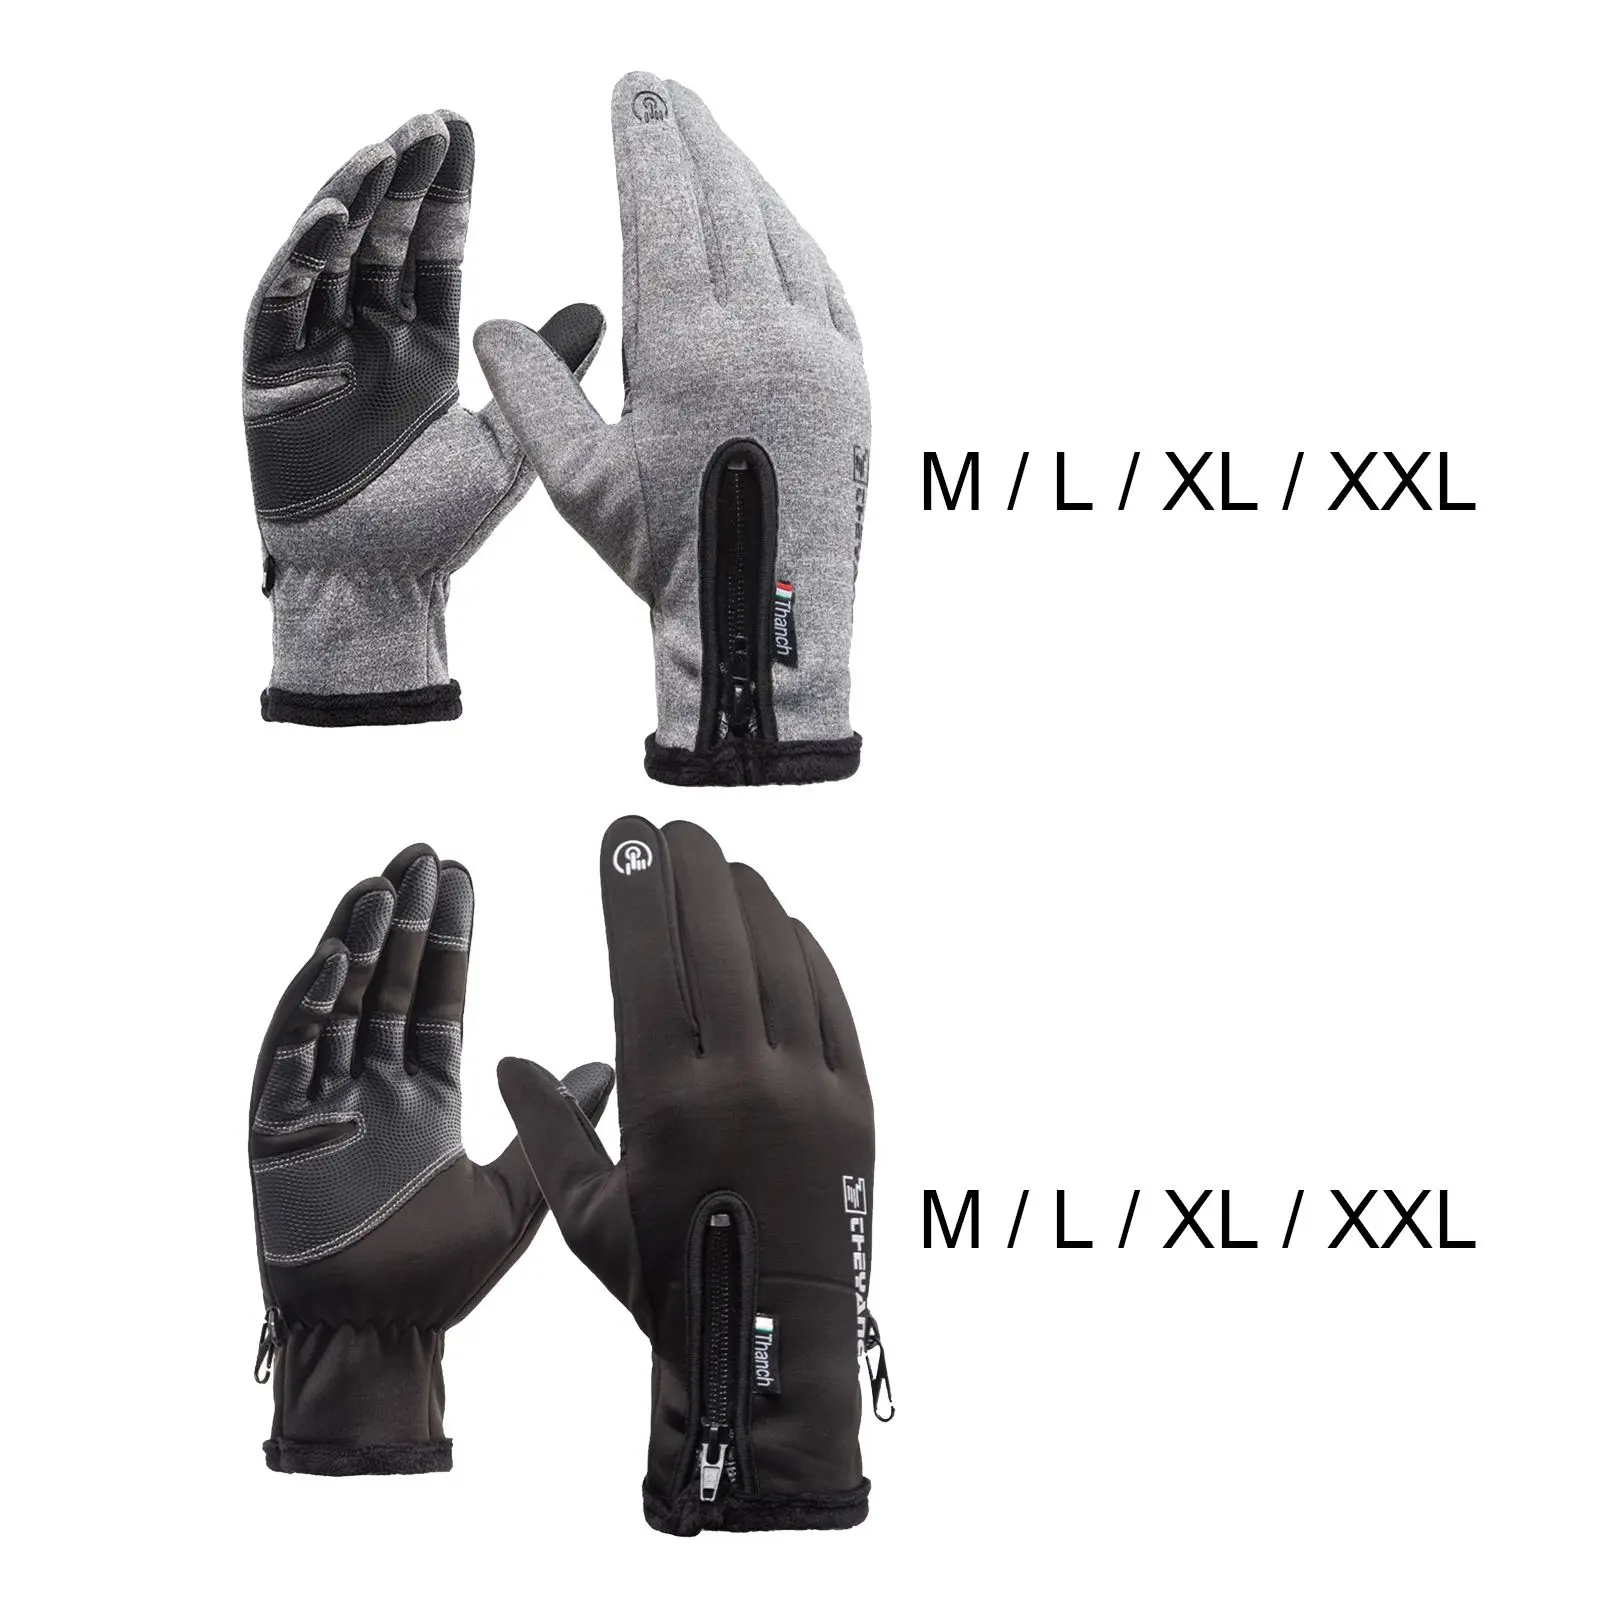 Windproof Cycling Gloves Touch Screen Riding Bike Bicycle Gloves Thermal Warm Motorcycle Winter Bike Motorcycle Gloves